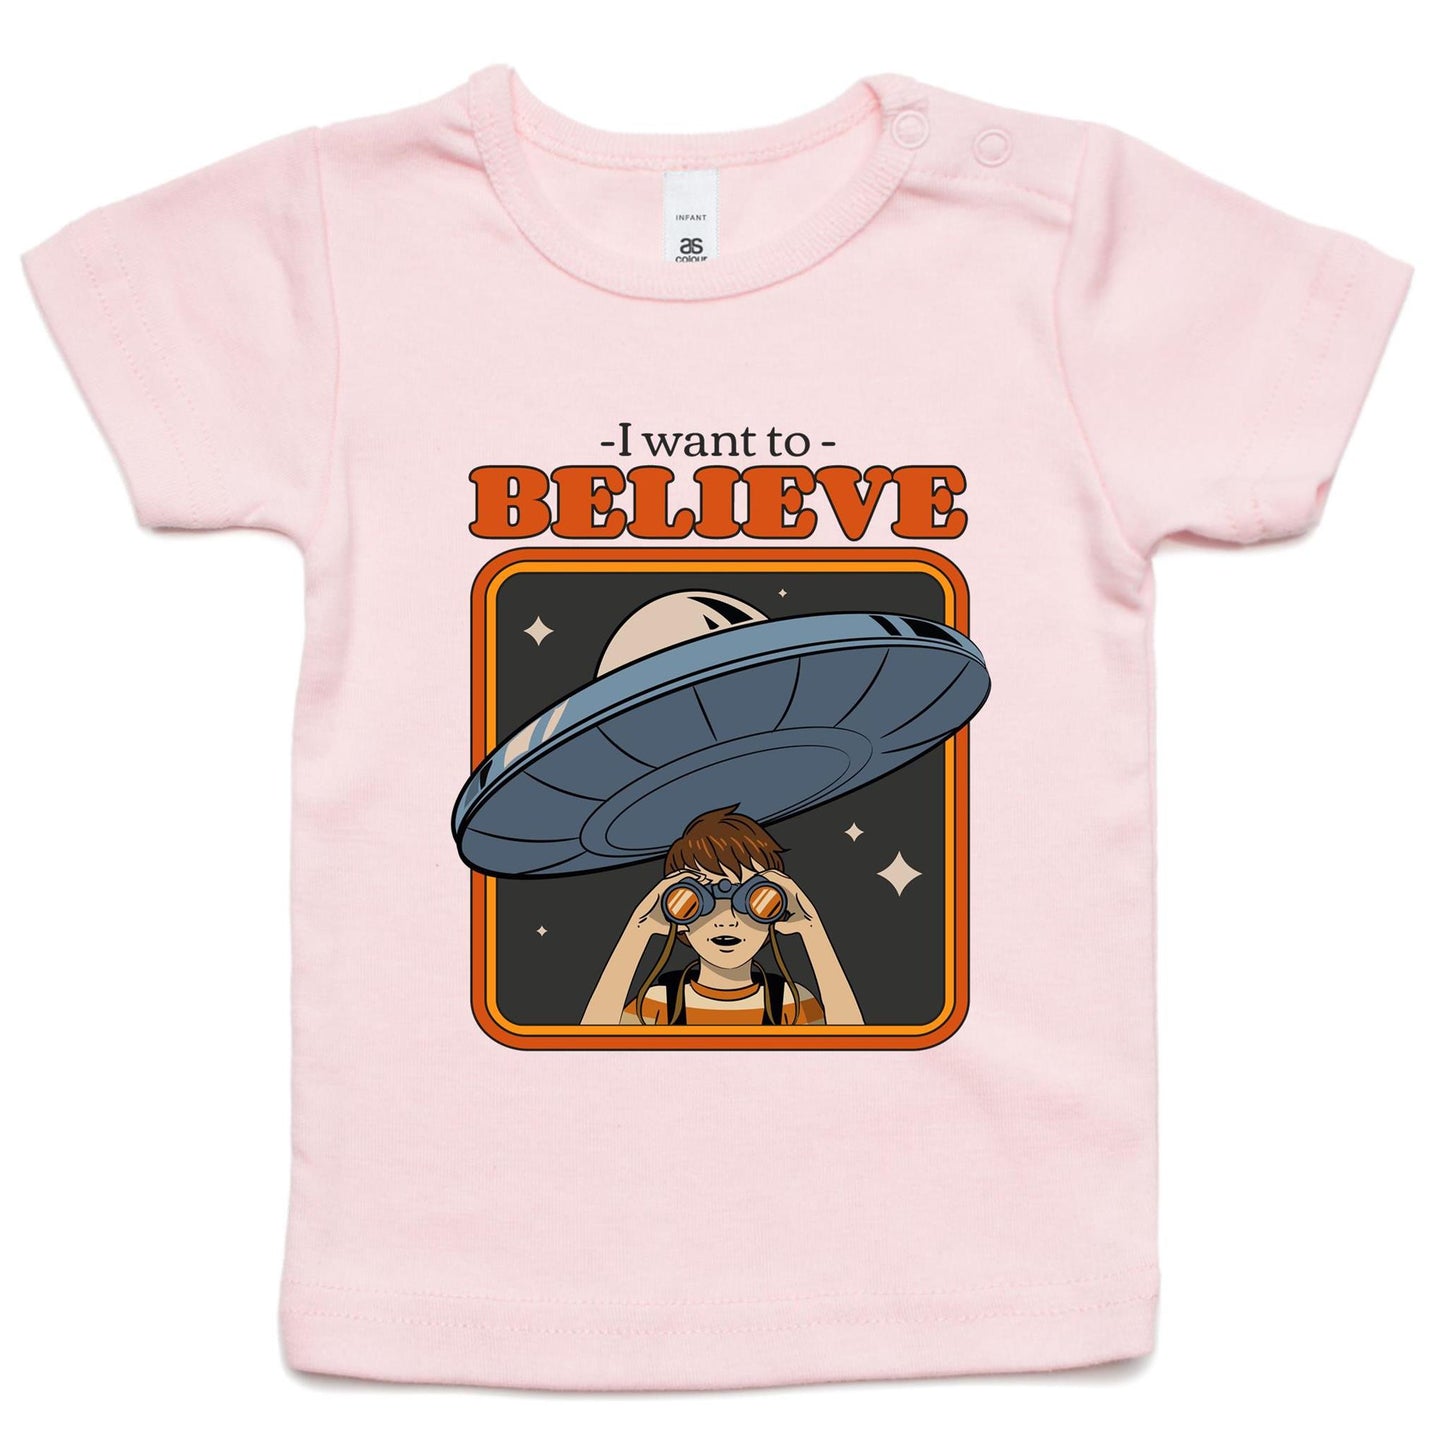 I Want To Believe - Baby T-shirt Pink Baby T-shirt Sci Fi